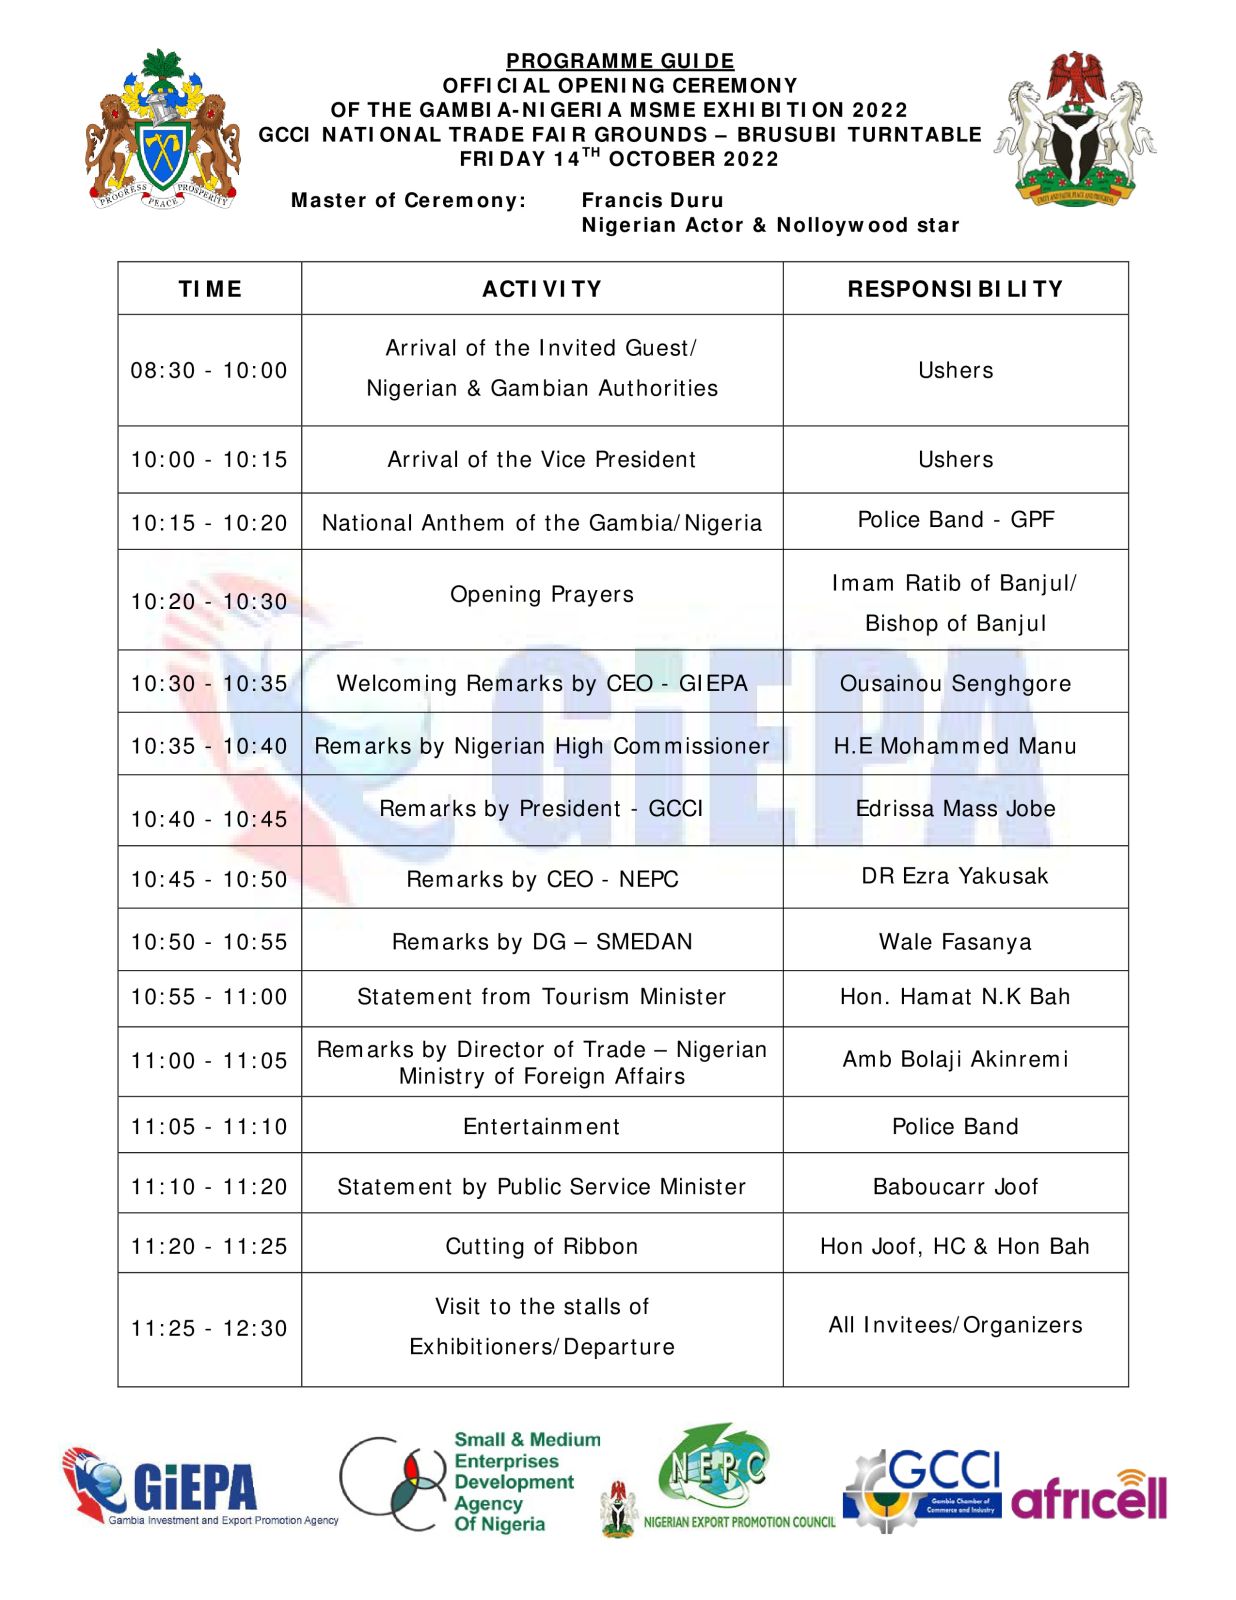 Program Guide For The Official Opening Of The Gambia - Nigeria MSME Exhibition 2022 Main Photo